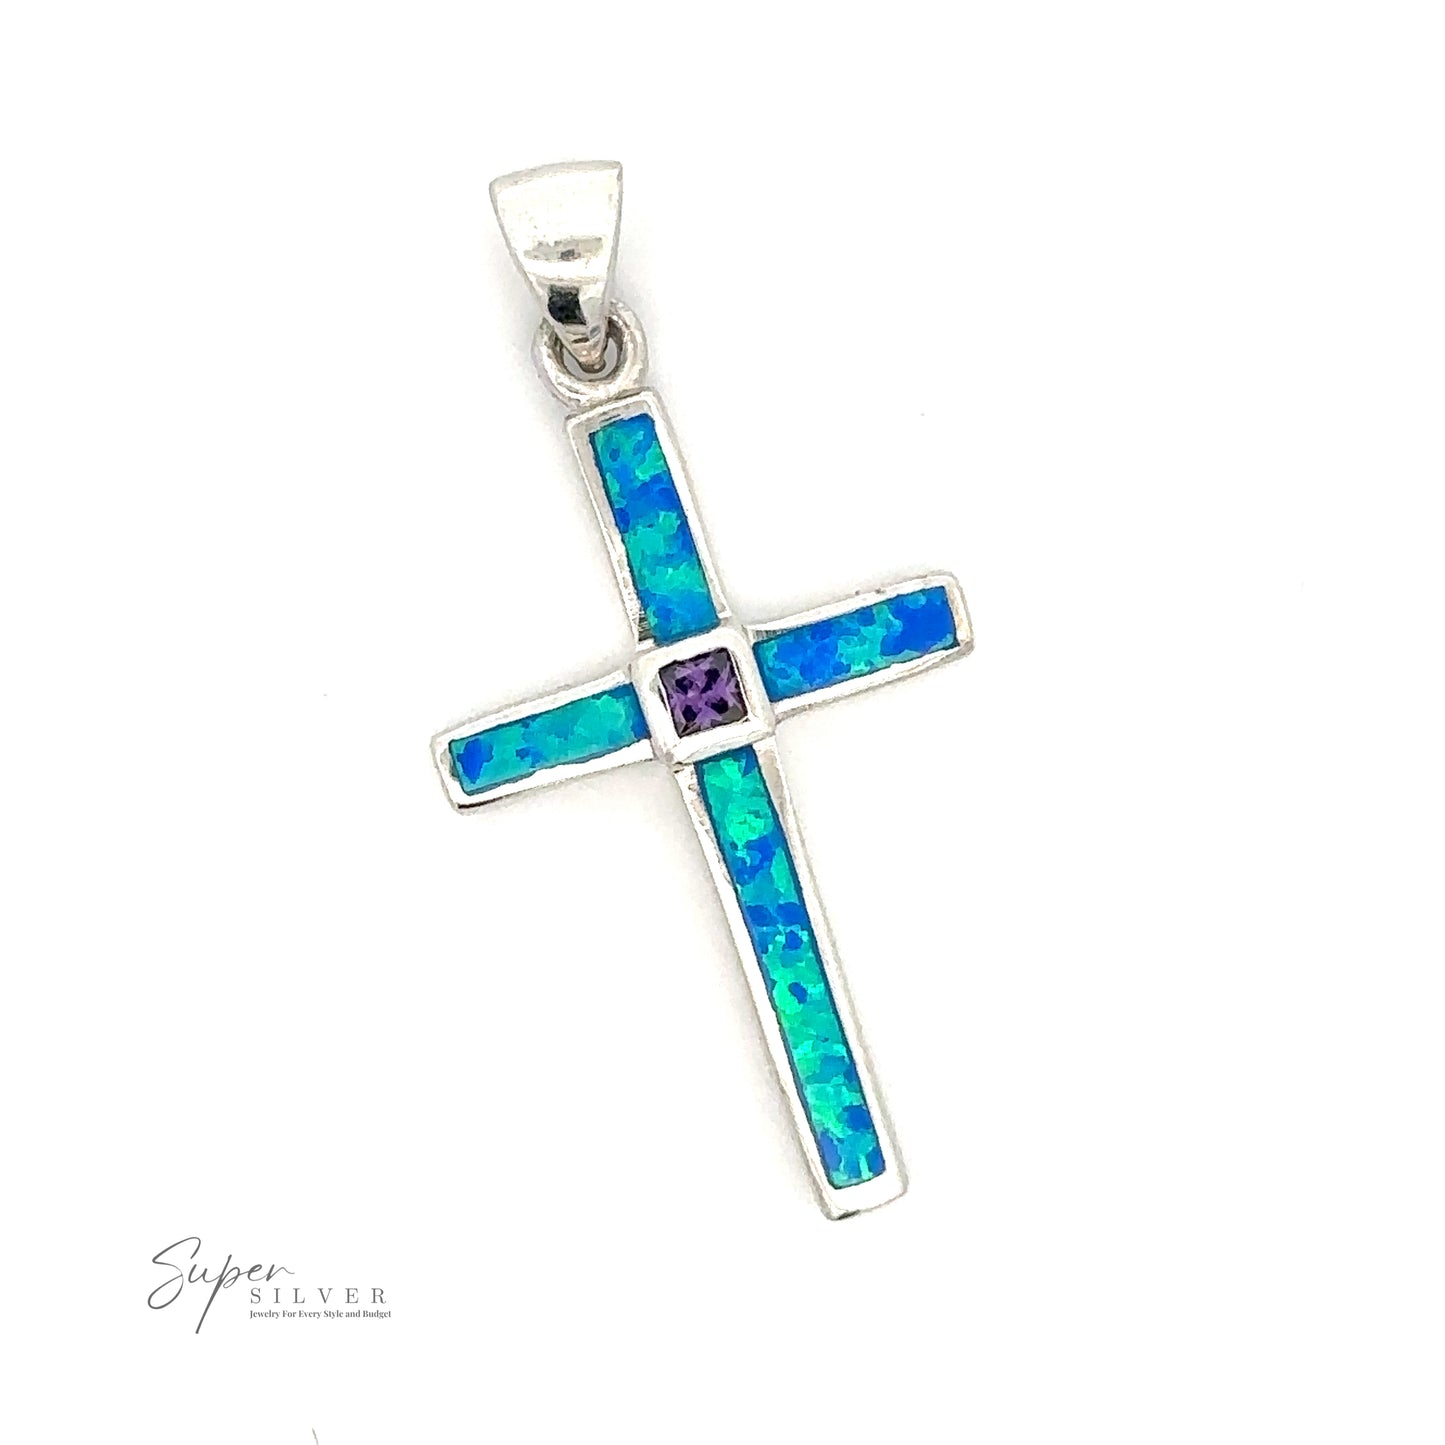 
                  
                    A Blue Opal Cross Pendant With Amethyst Stone with blue and green segments features a faceted amethyst center stone. The Super Silver logo is visible in the bottom left corner, enhancing the elegance of this .925 Sterling Silver piece.
                  
                